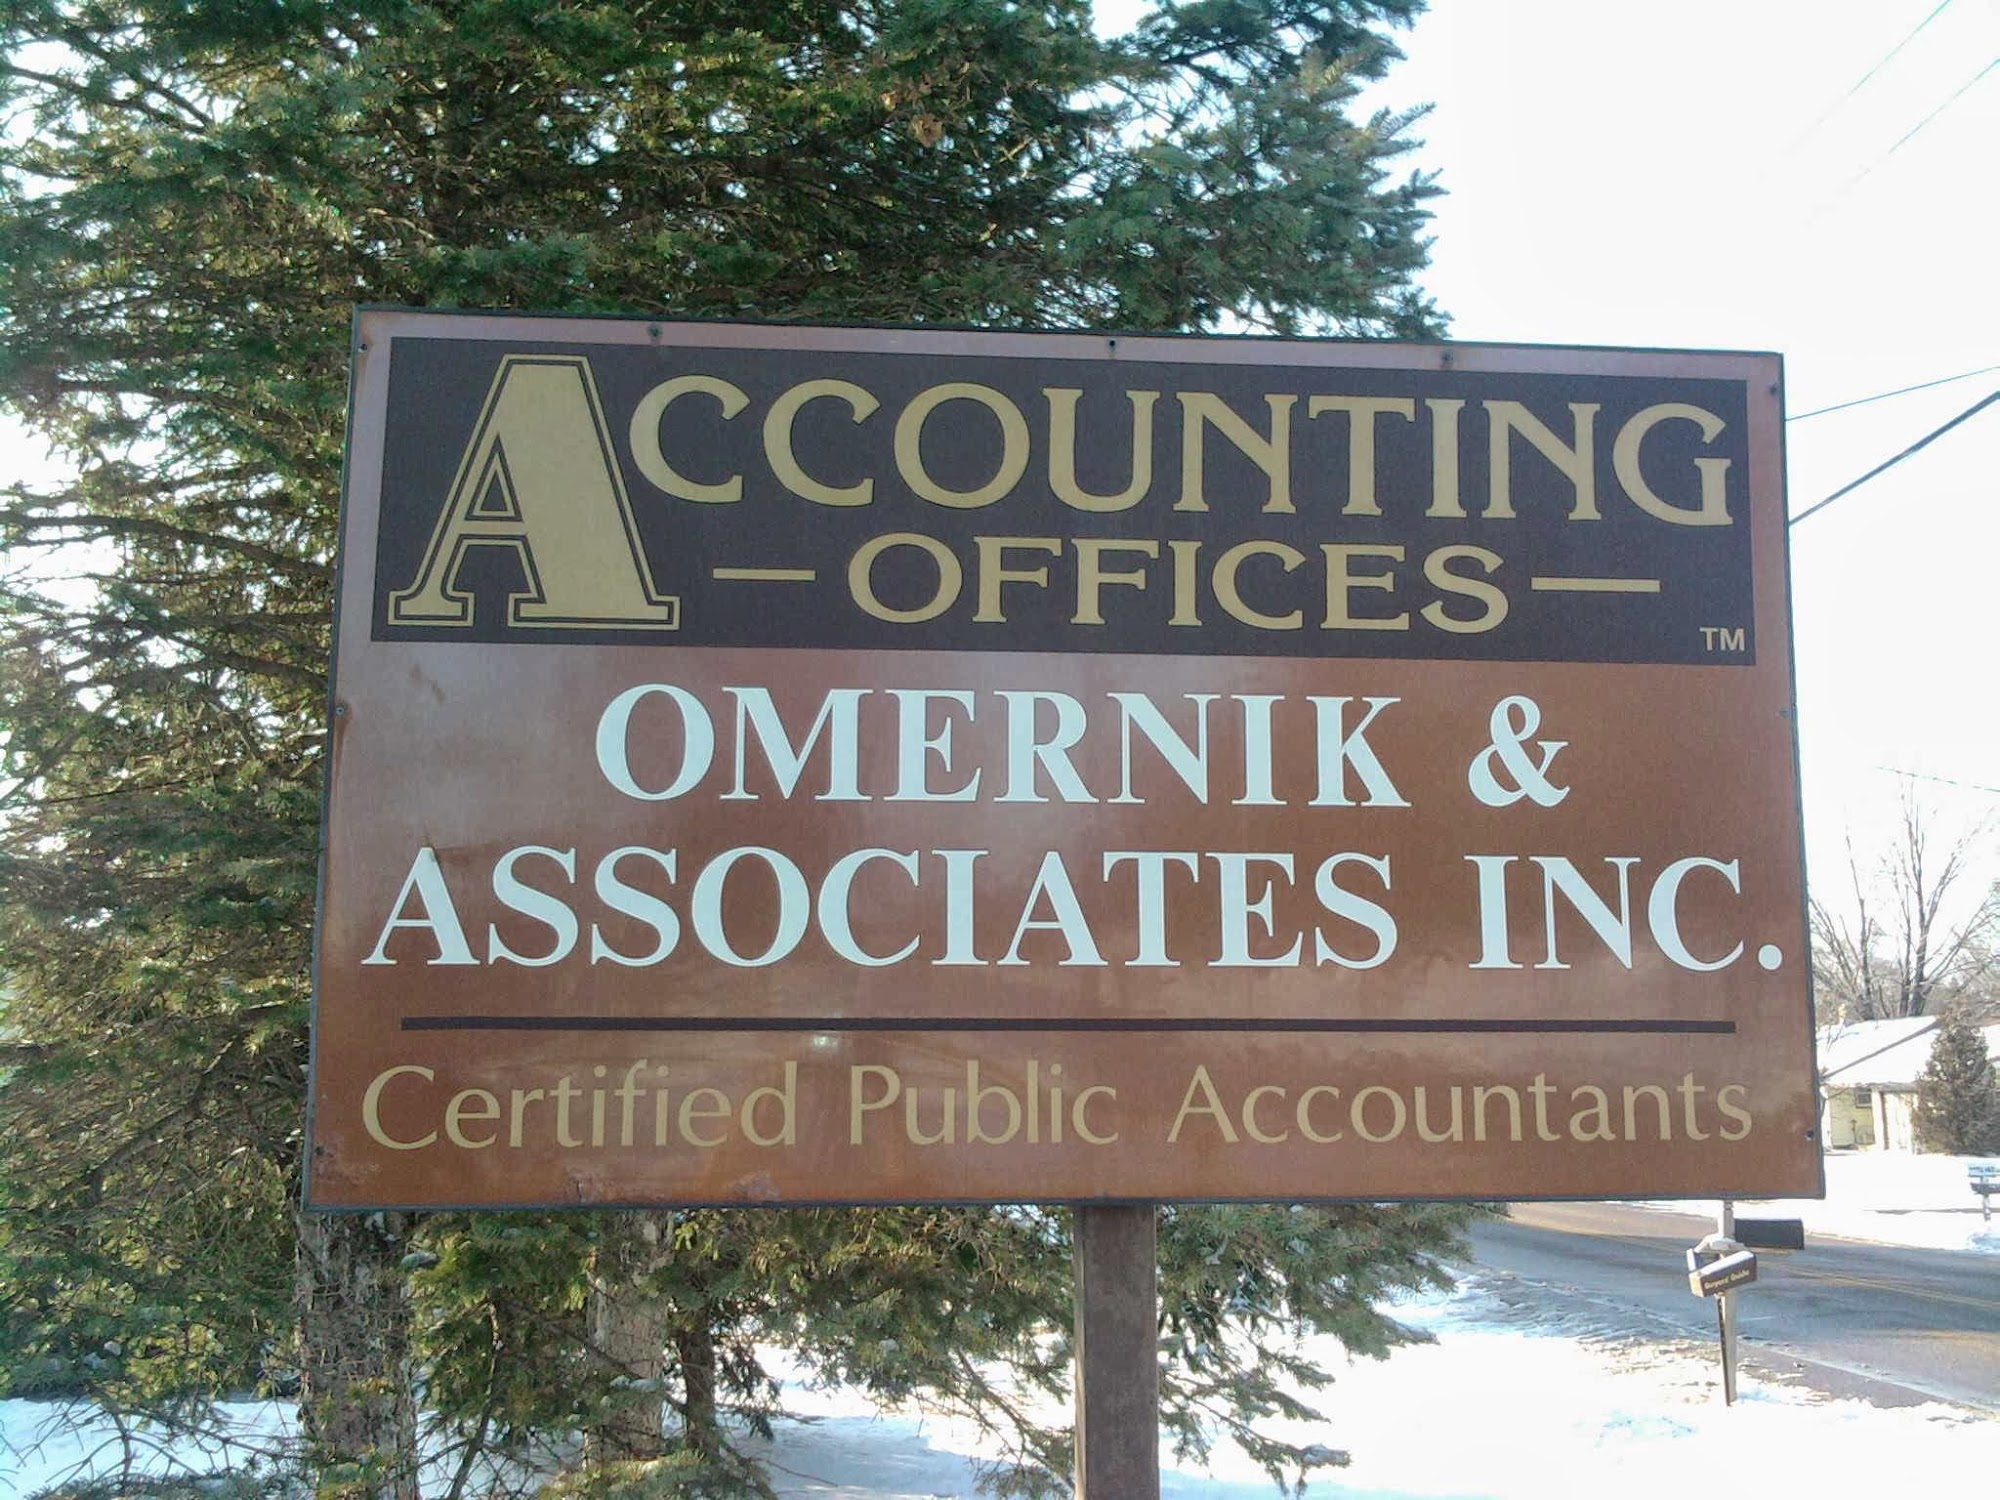 Omernik & Associates, Inc. Accounting Offices 3121 Tommys Turnpike, Plover Wisconsin 54467